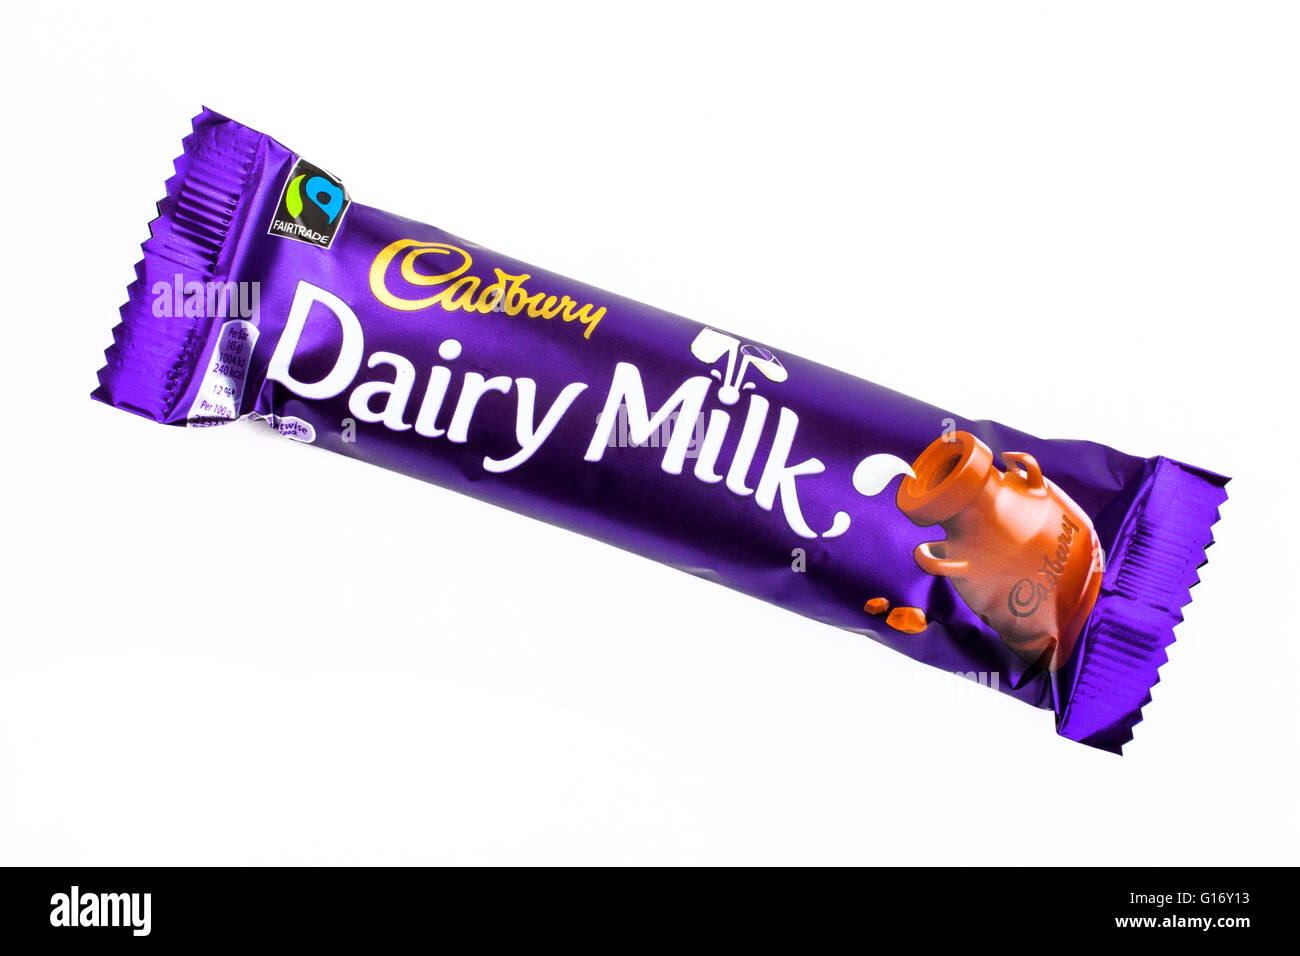 LONDON, UK - MAY 6TH 2016: An Unopened Wispa Gold Chocolate Bar  Manufactured By Cadbury, Pictured Over A Plain White Background On 6th May  2016. Stock Photo, Picture and Royalty Free Image. Image 58701328.